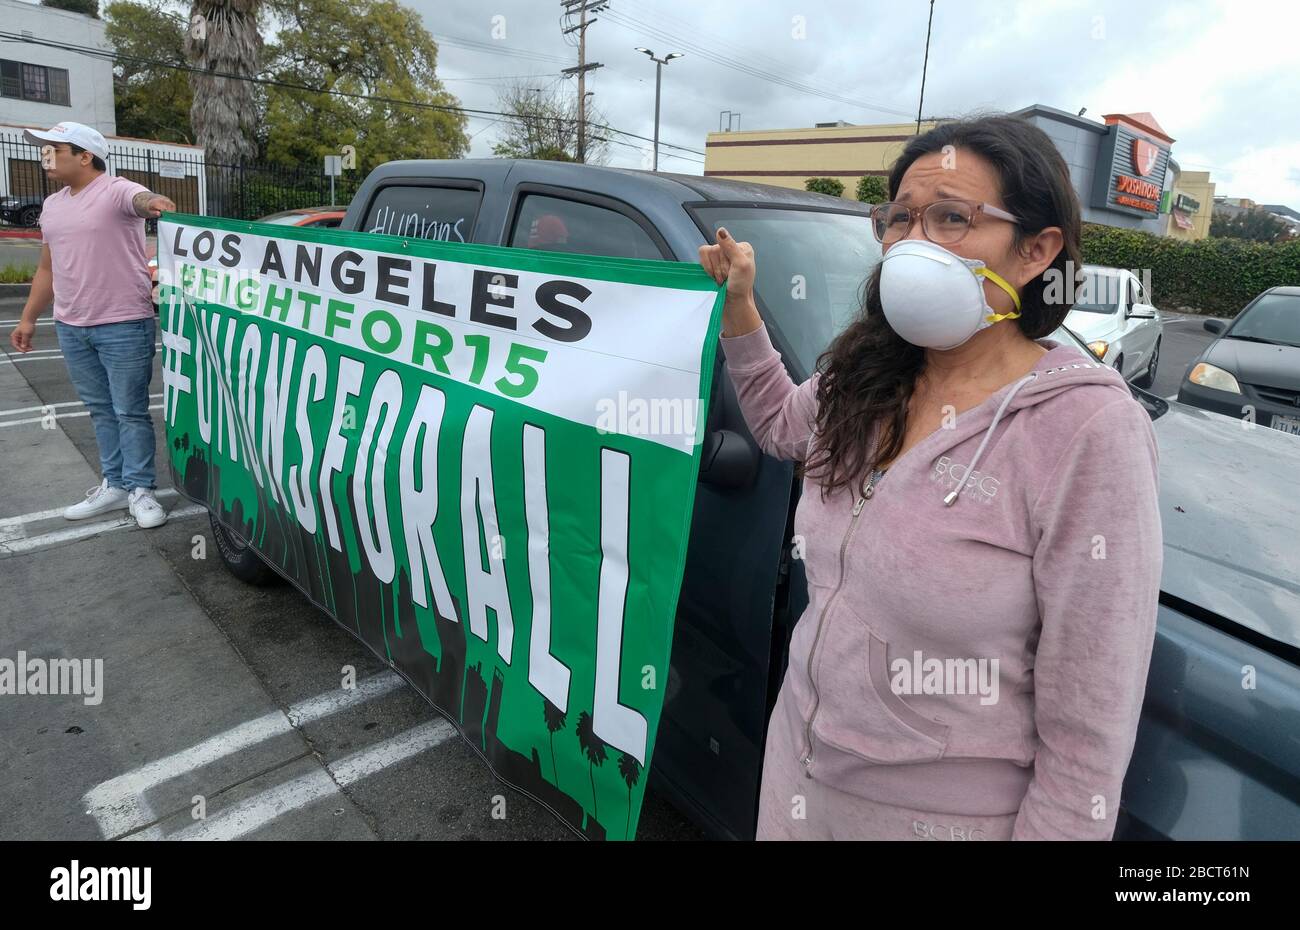 Los Angeles, California, USA. 5th Apr, 2020. Workers take part in a drive-thru ''strike'' at a McDonald's restaurant on Sunday, April 5, 2020 in Los Angeles. The workers are demanding a two-week quarantine period, with full pay for a co-worker who tested positive for COVID-19. Credit: Ringo Chiu/ZUMA Wire/Alamy Live News Stock Photo